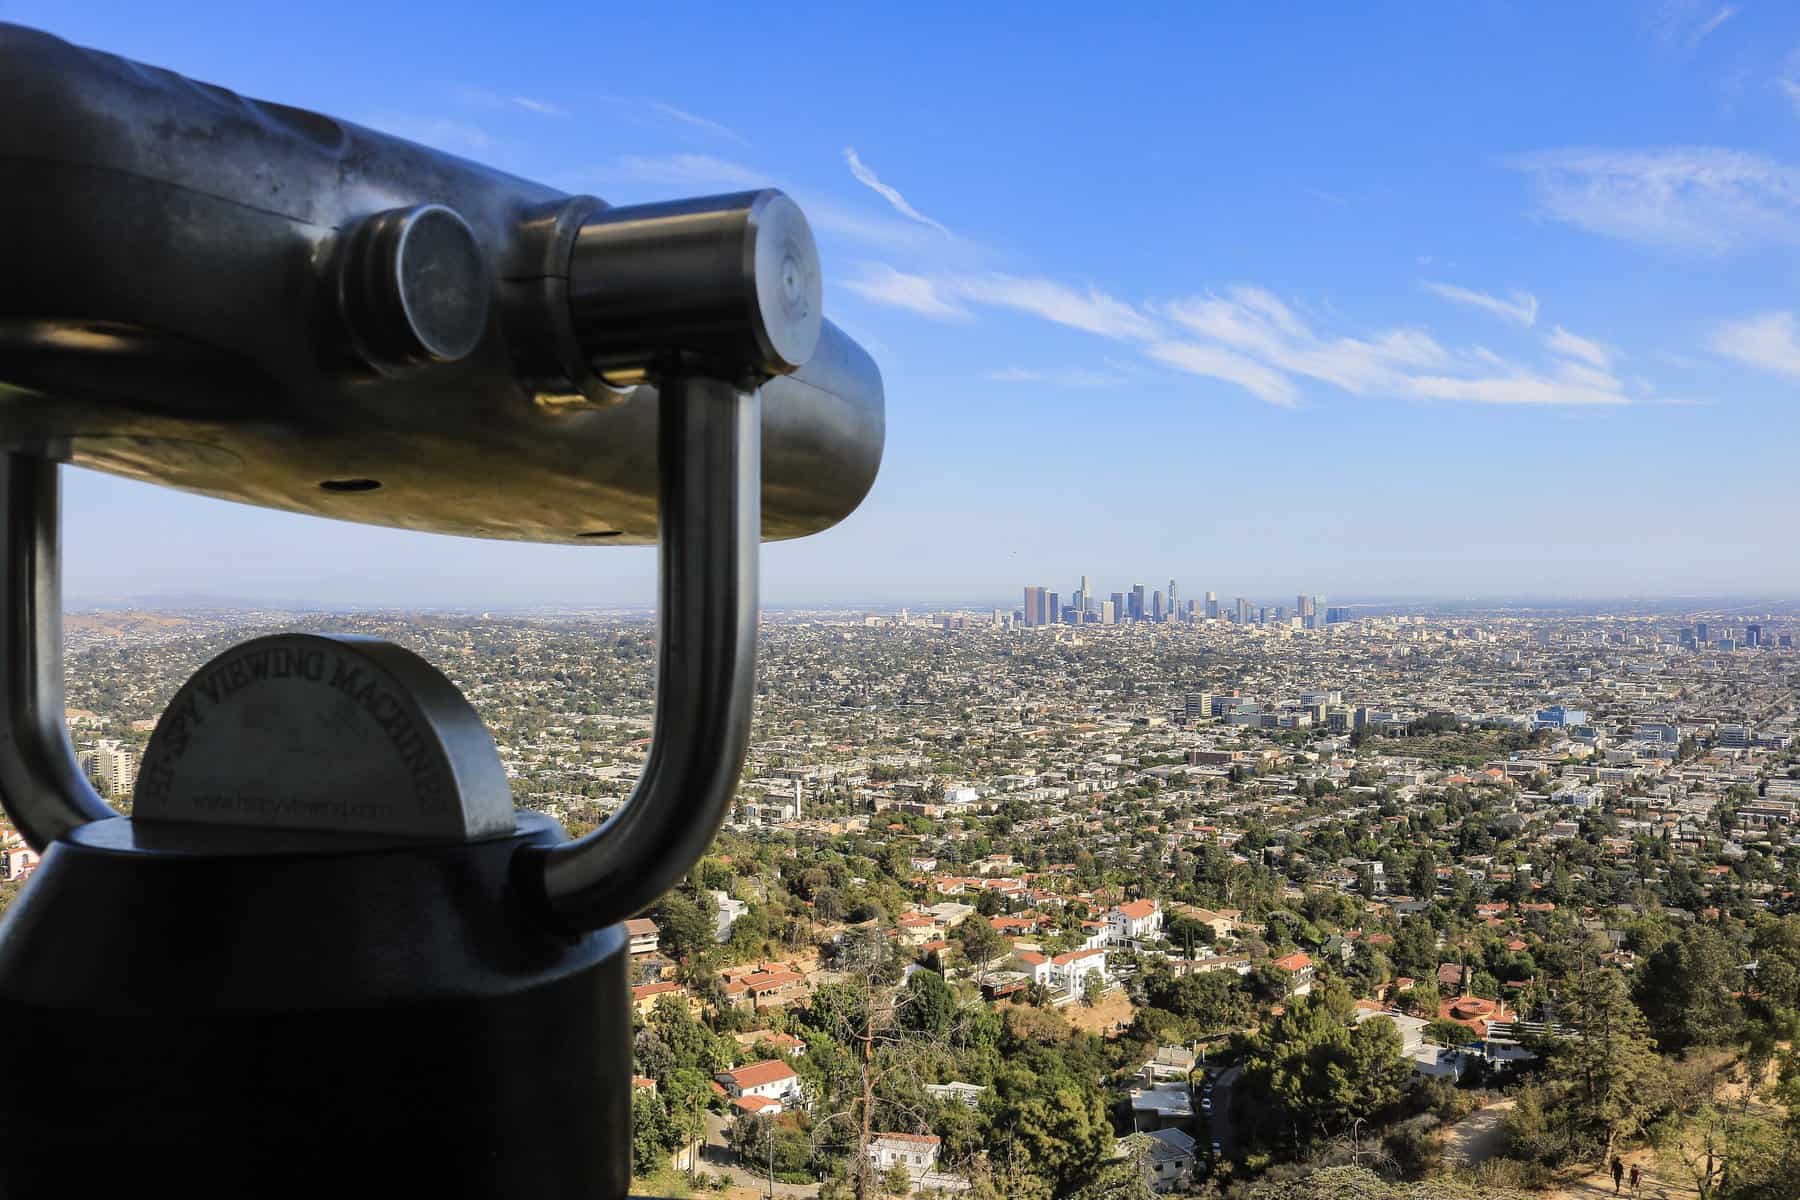 View of downtown Los Angeles from the Griffith Observatory.